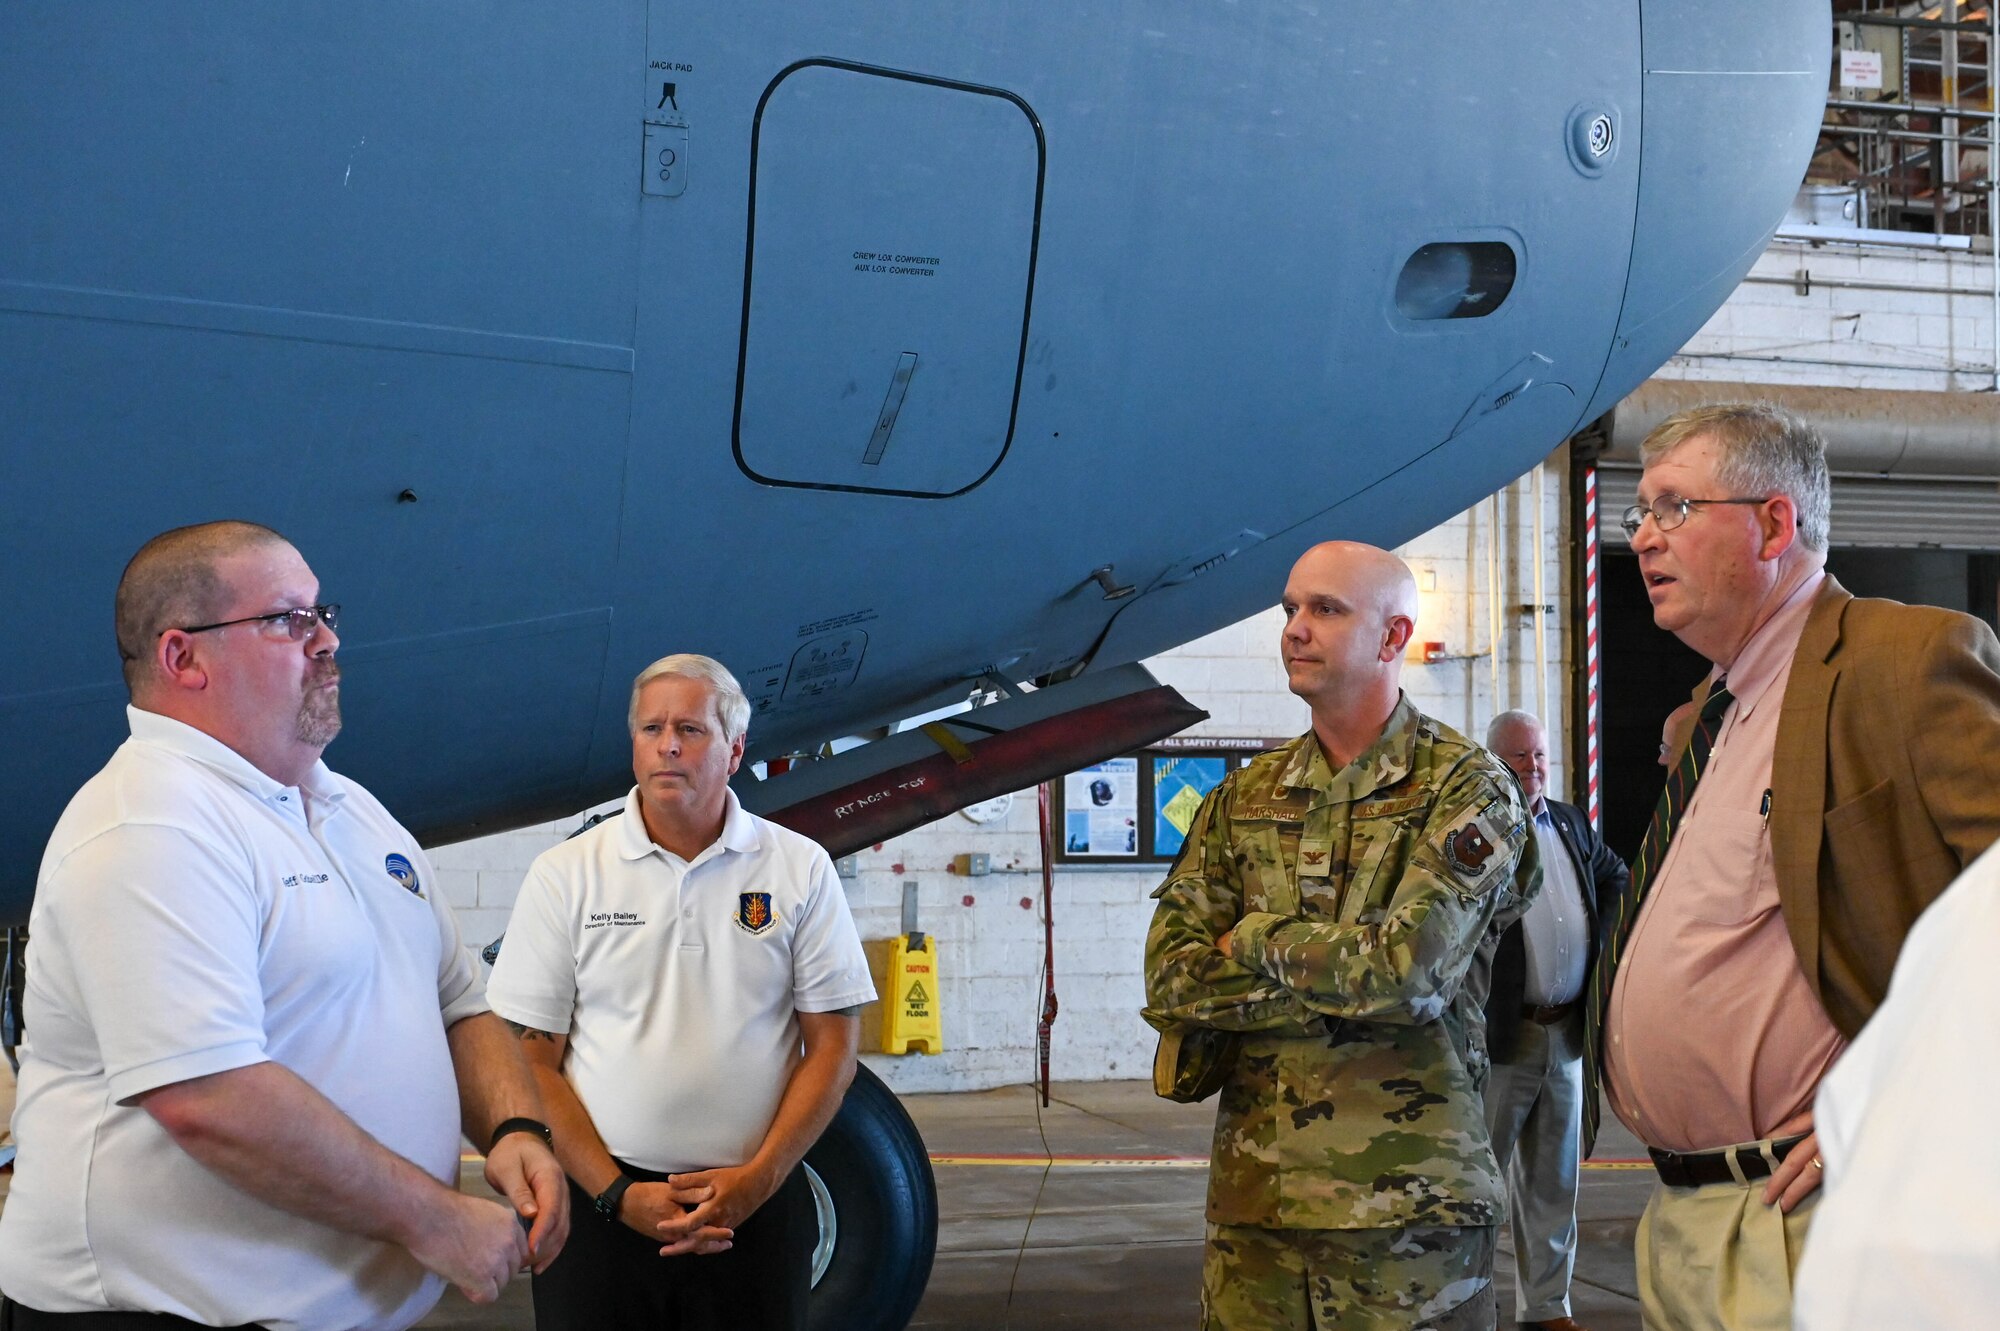 United States Representative Frank Lucas (right) speaks to Jeff Gobeille, 97th Maintenance Squadron Maintenance Flight superintendent (left), at Altus Air Force Base, Oklahoma, Aug. 3, 2023. The group met to discuss KC-46 Pegasus current and projected maintenance and staffing needs. (U.S. Air Force photo by Airman 1st Class Heidi Bucins)